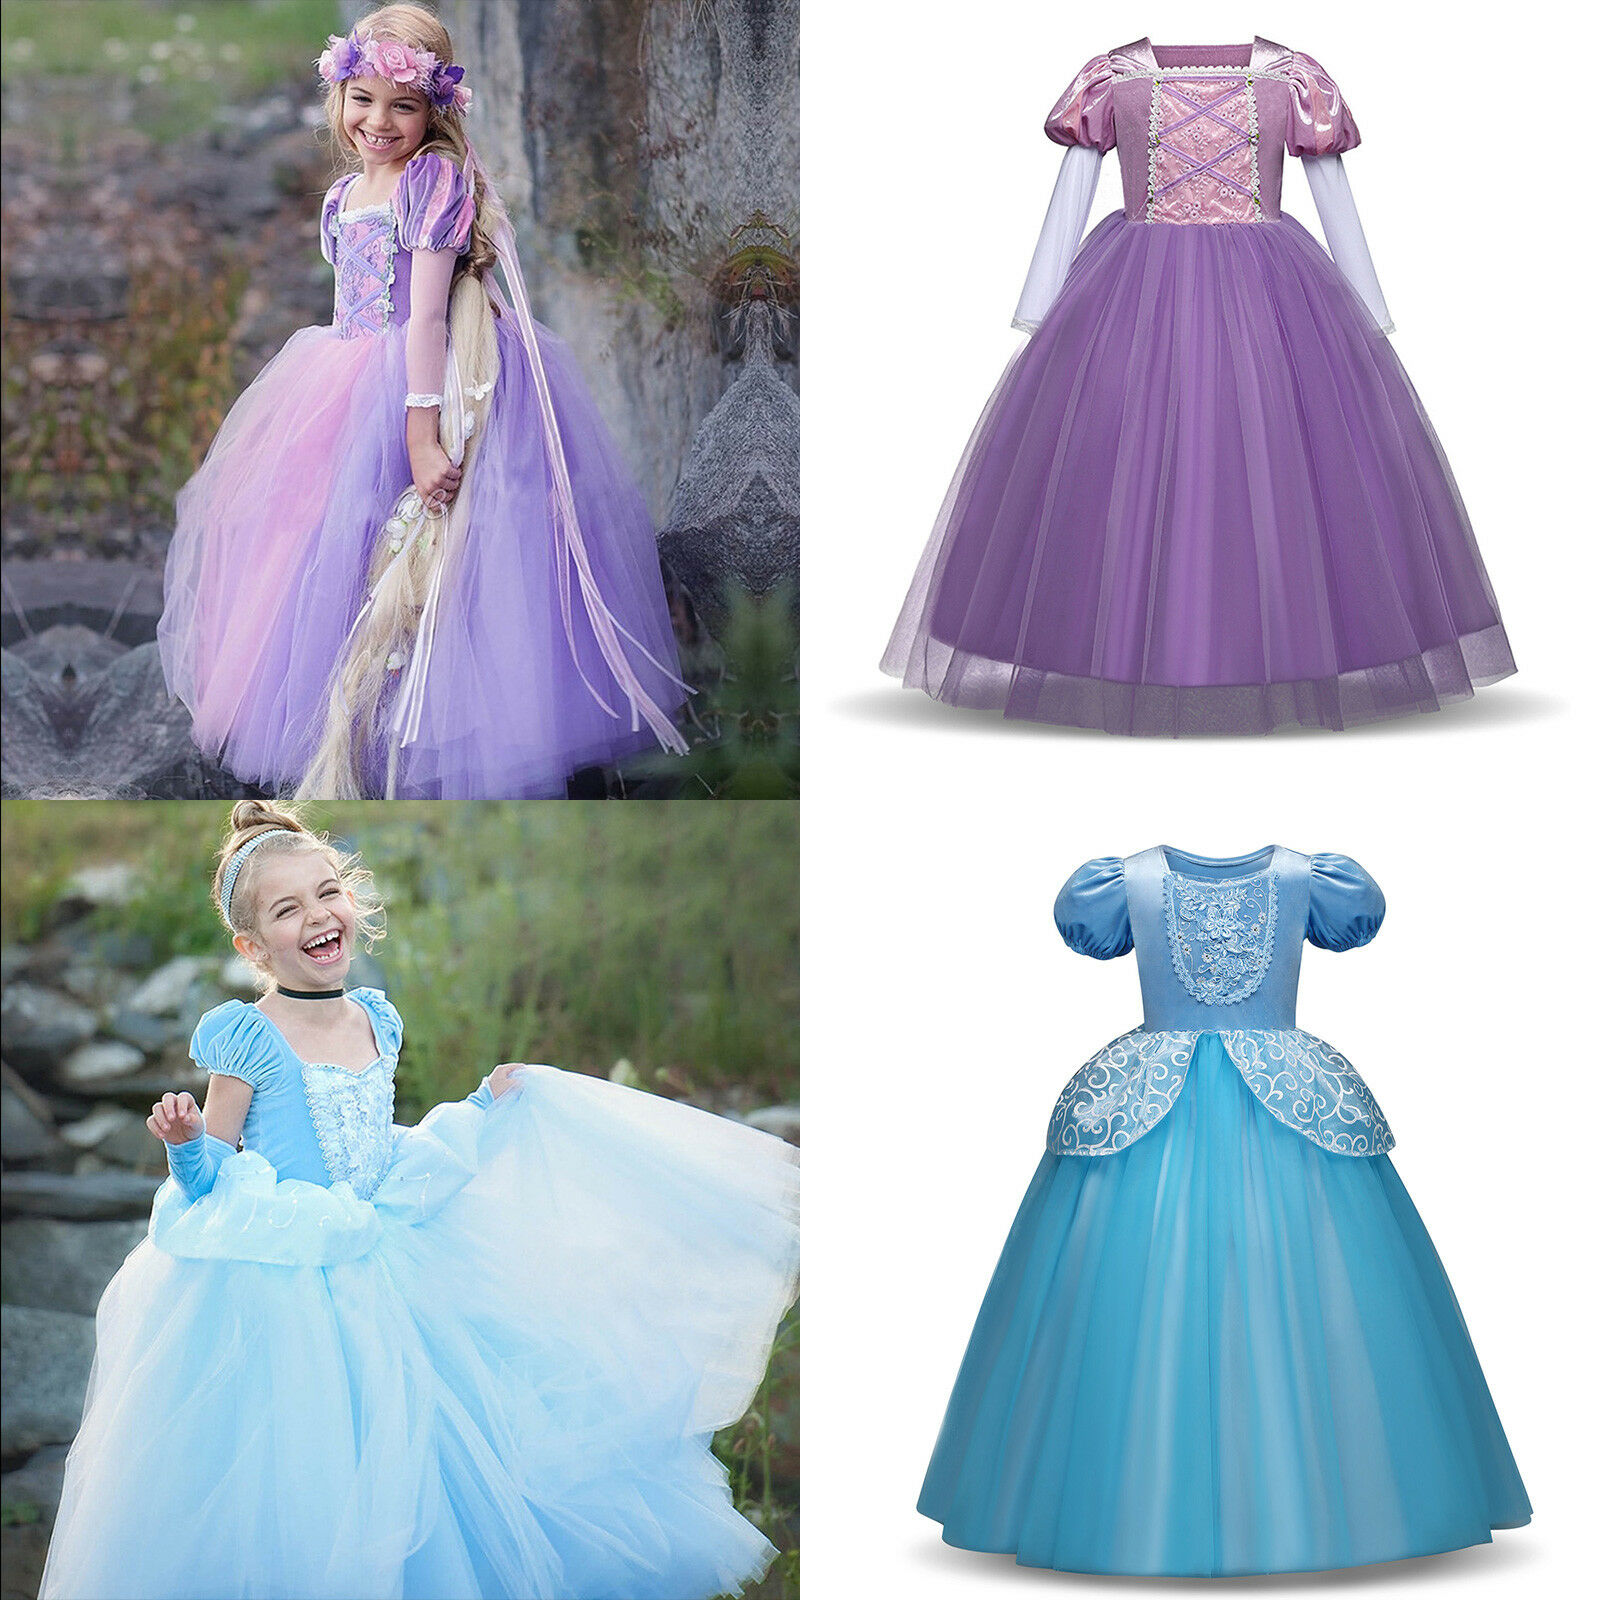 Princess Sofia Rapunzel Costume Cosplay Party Long Gown Dress Up For Kids Girls